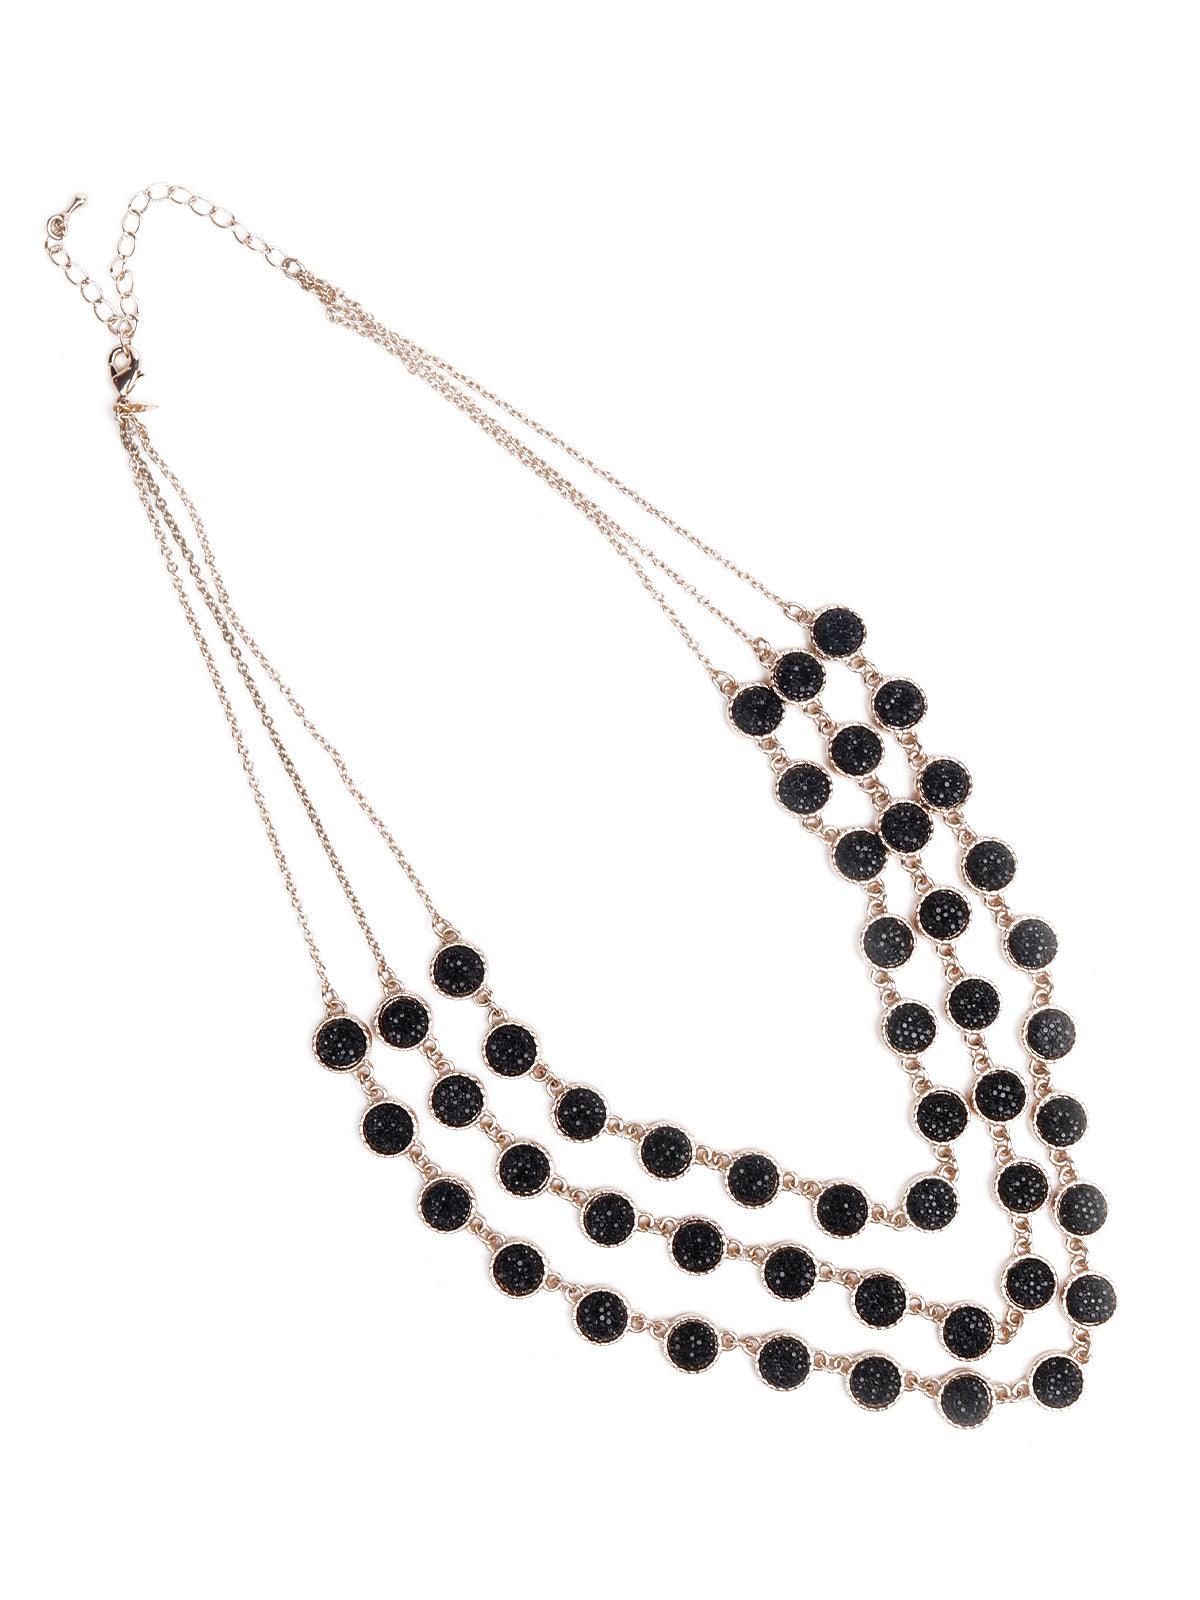 Women's Black Beaded Layered Necklace - Odette